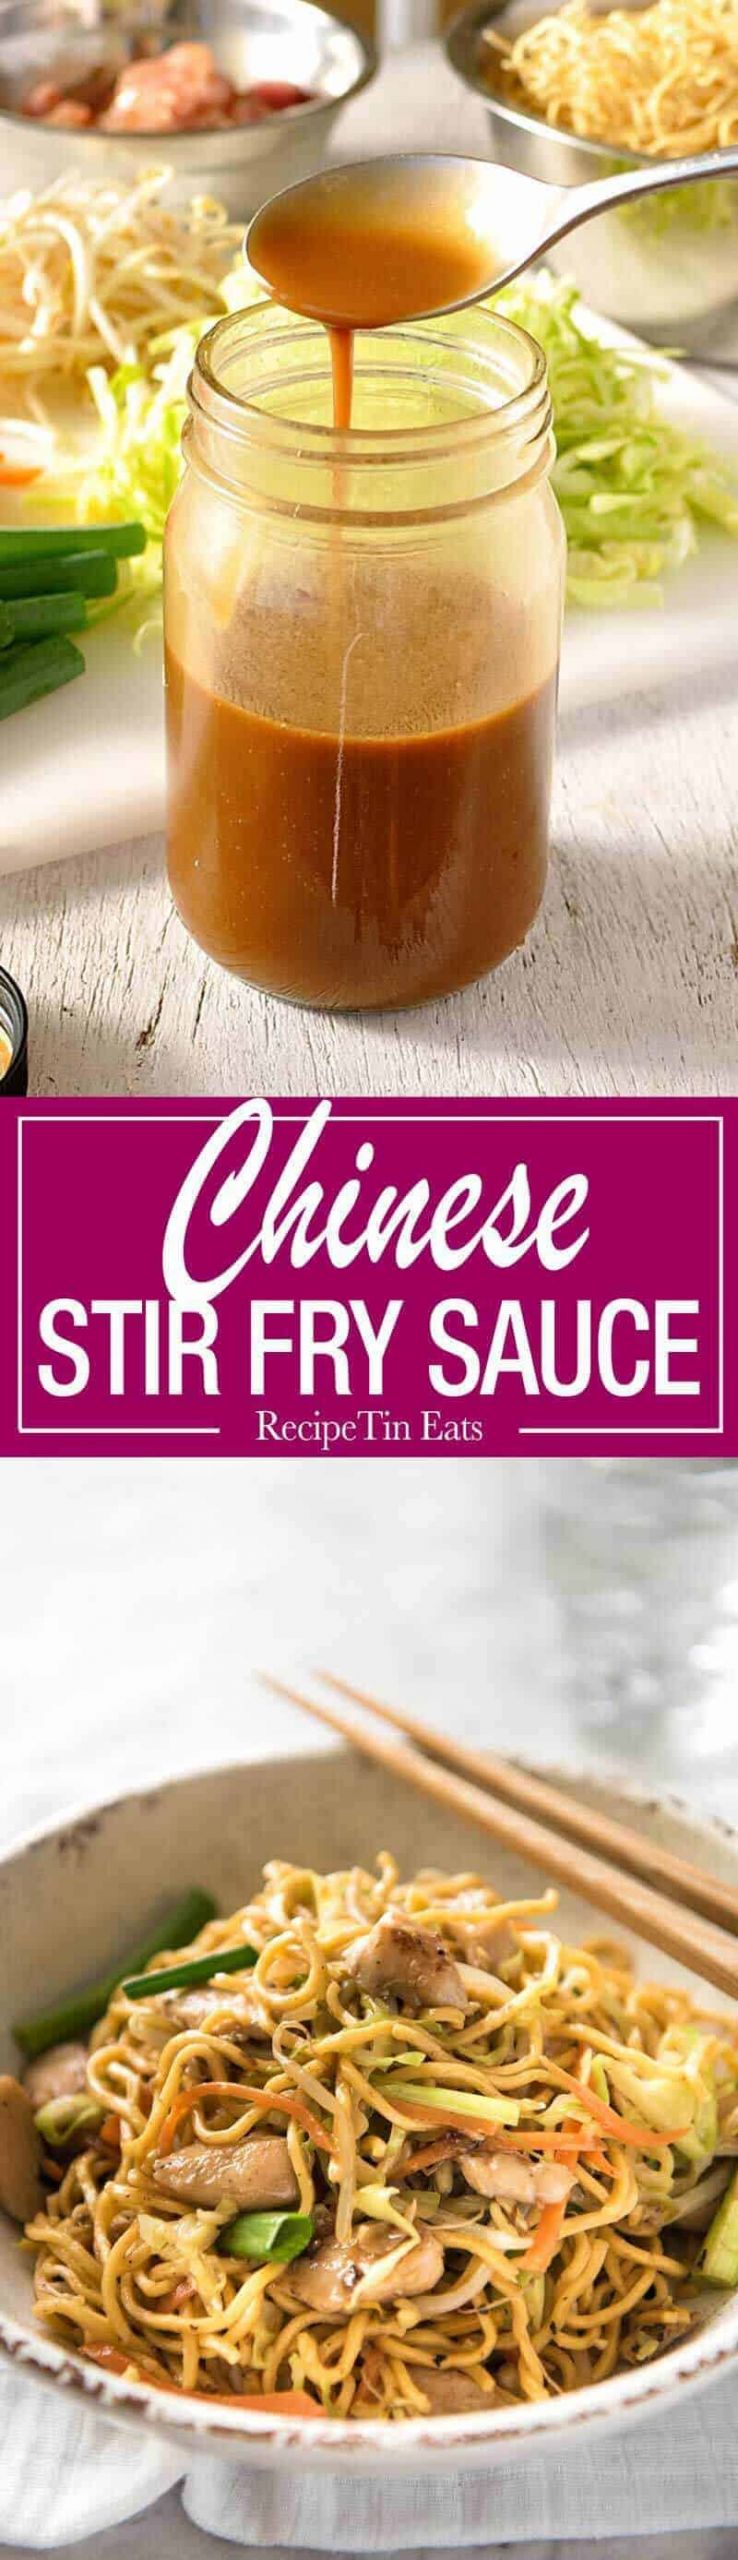 Asian Sauce Recipes
 Real Chinese All Purpose Stir Fry Sauce